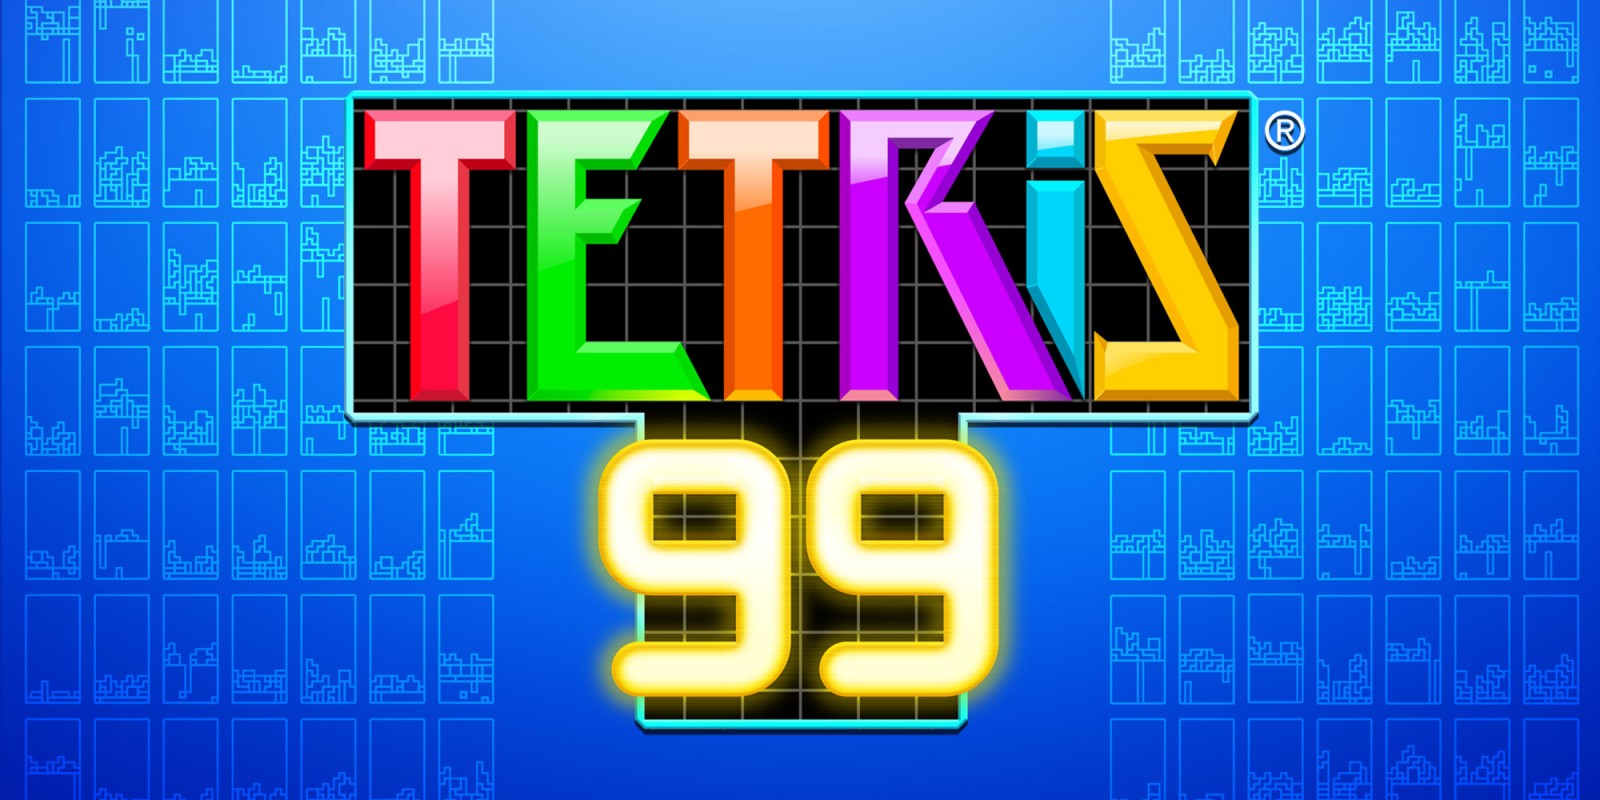 [Switch Save Progression] - Tetris 99 - All Themes and Badges Akirac Other Mods Seasonal and Non Seasonal Save Mod - Modded Items and Gear - Hacks - Cheats - Trainers for Playstation 4 - Playstation 5 - Nintendo Switch - Xbox One